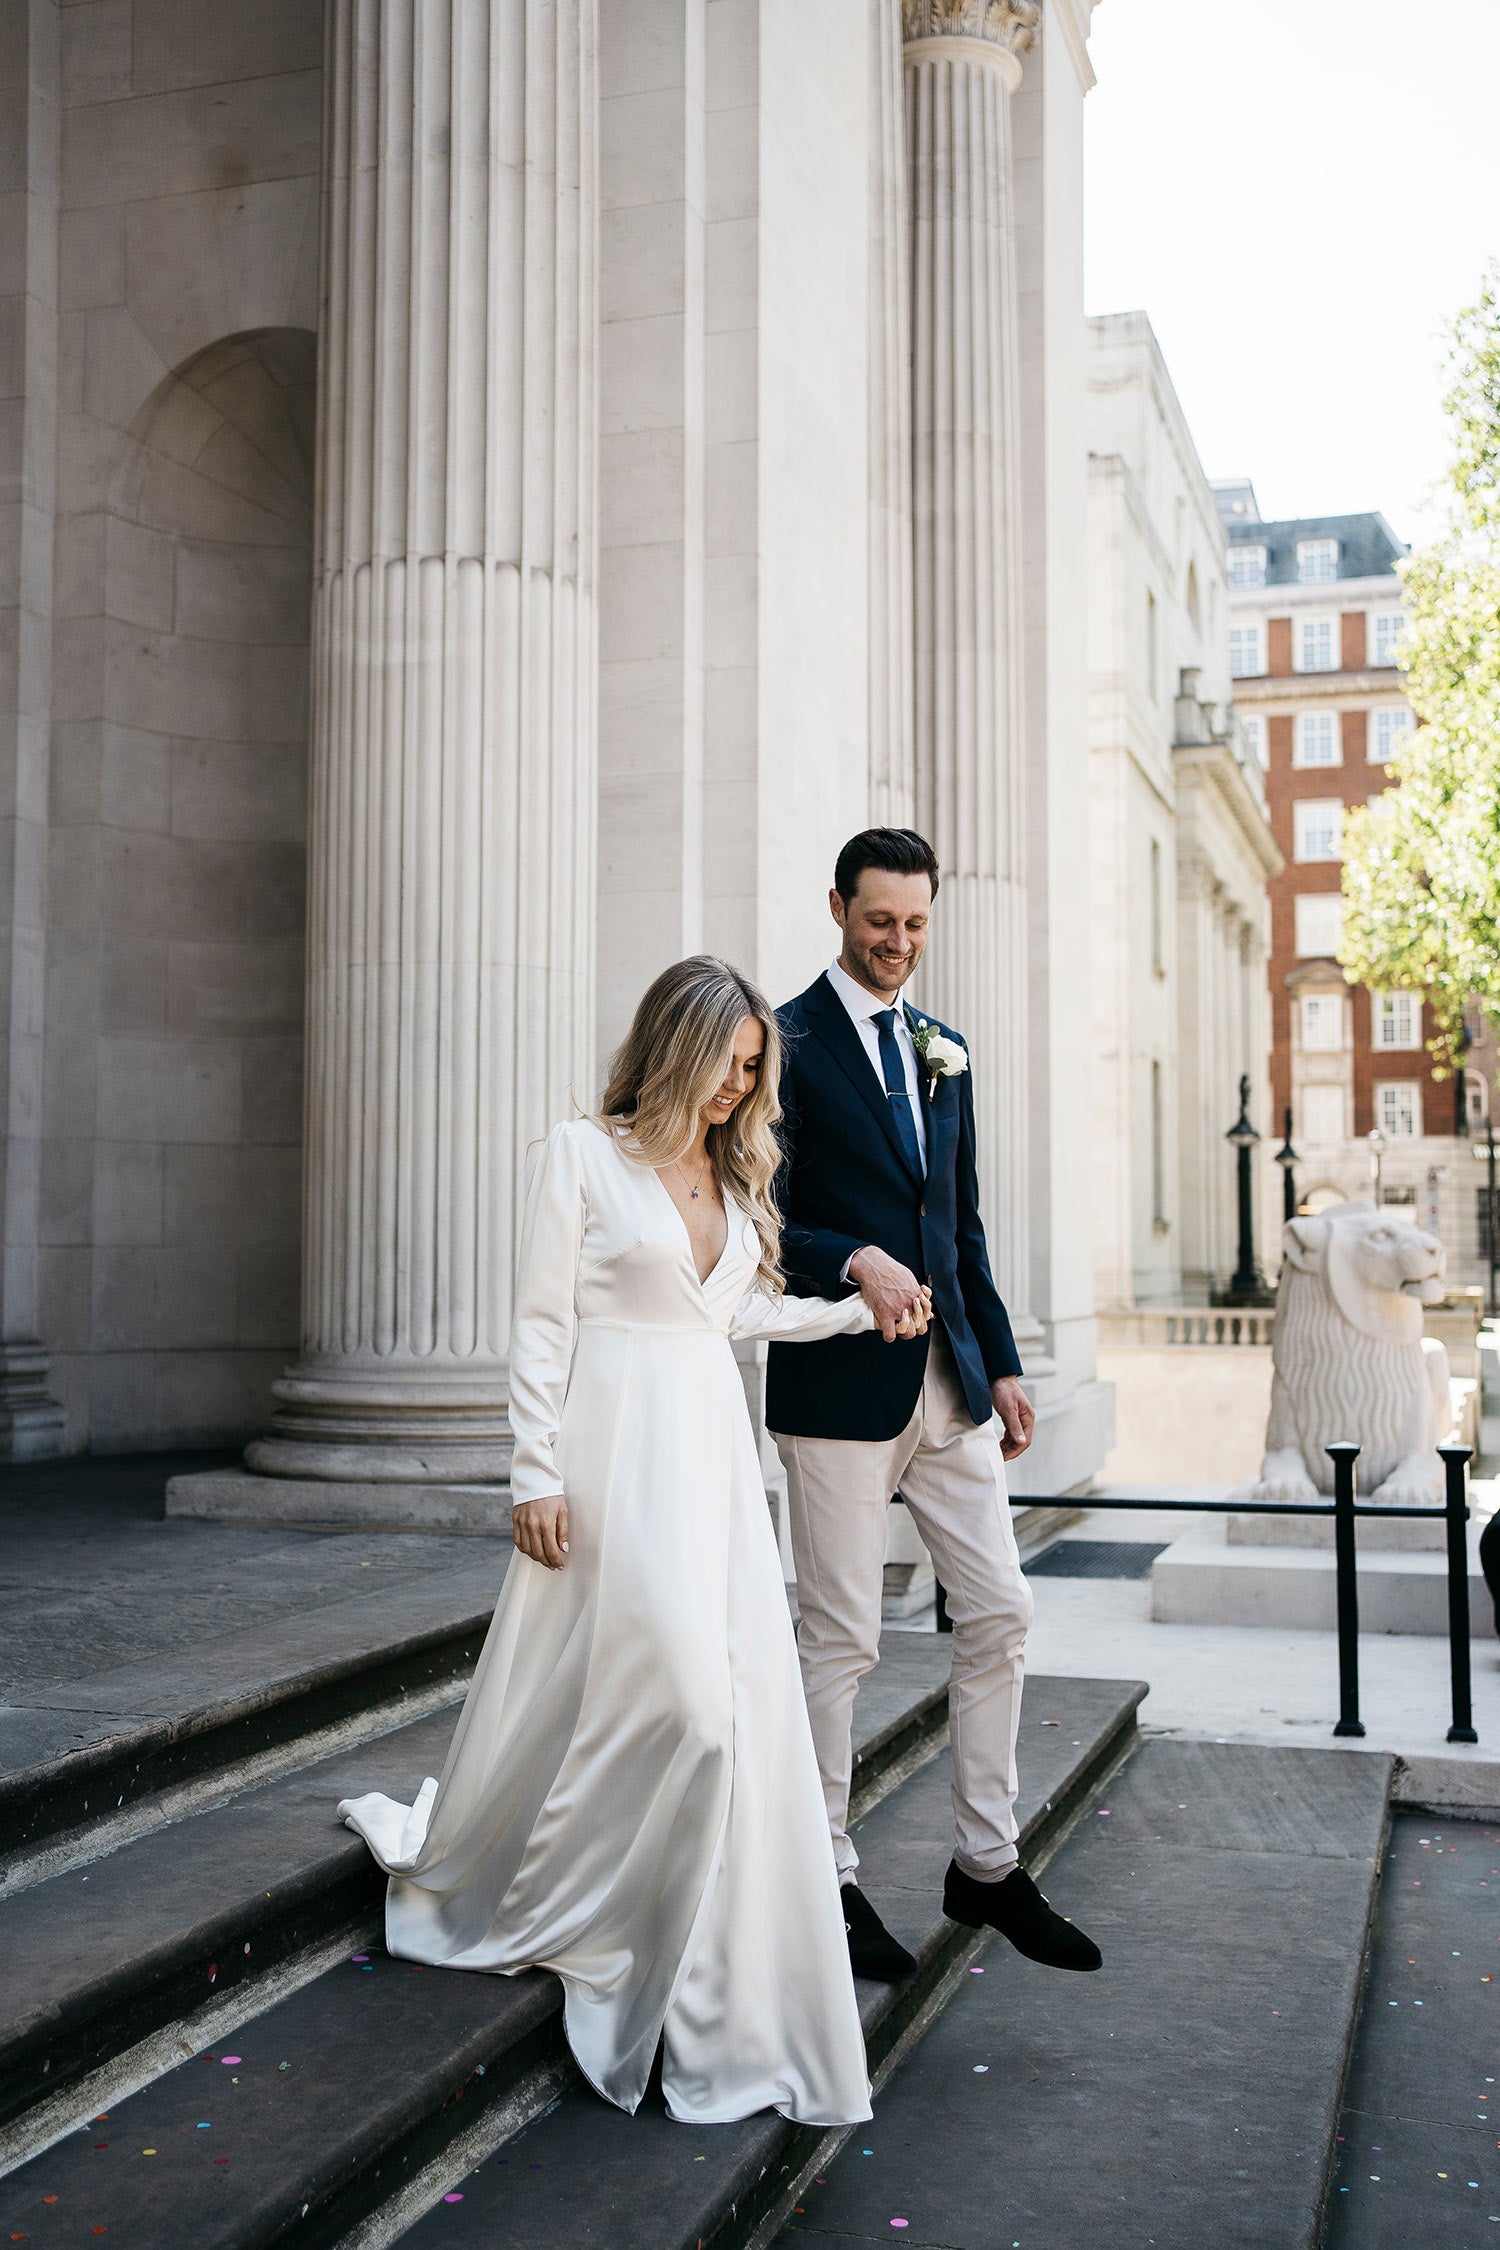 Our bride Charlotte wearing our Olsen Silk Wedding Dress shortly after her weding at Marylebond Town Hall